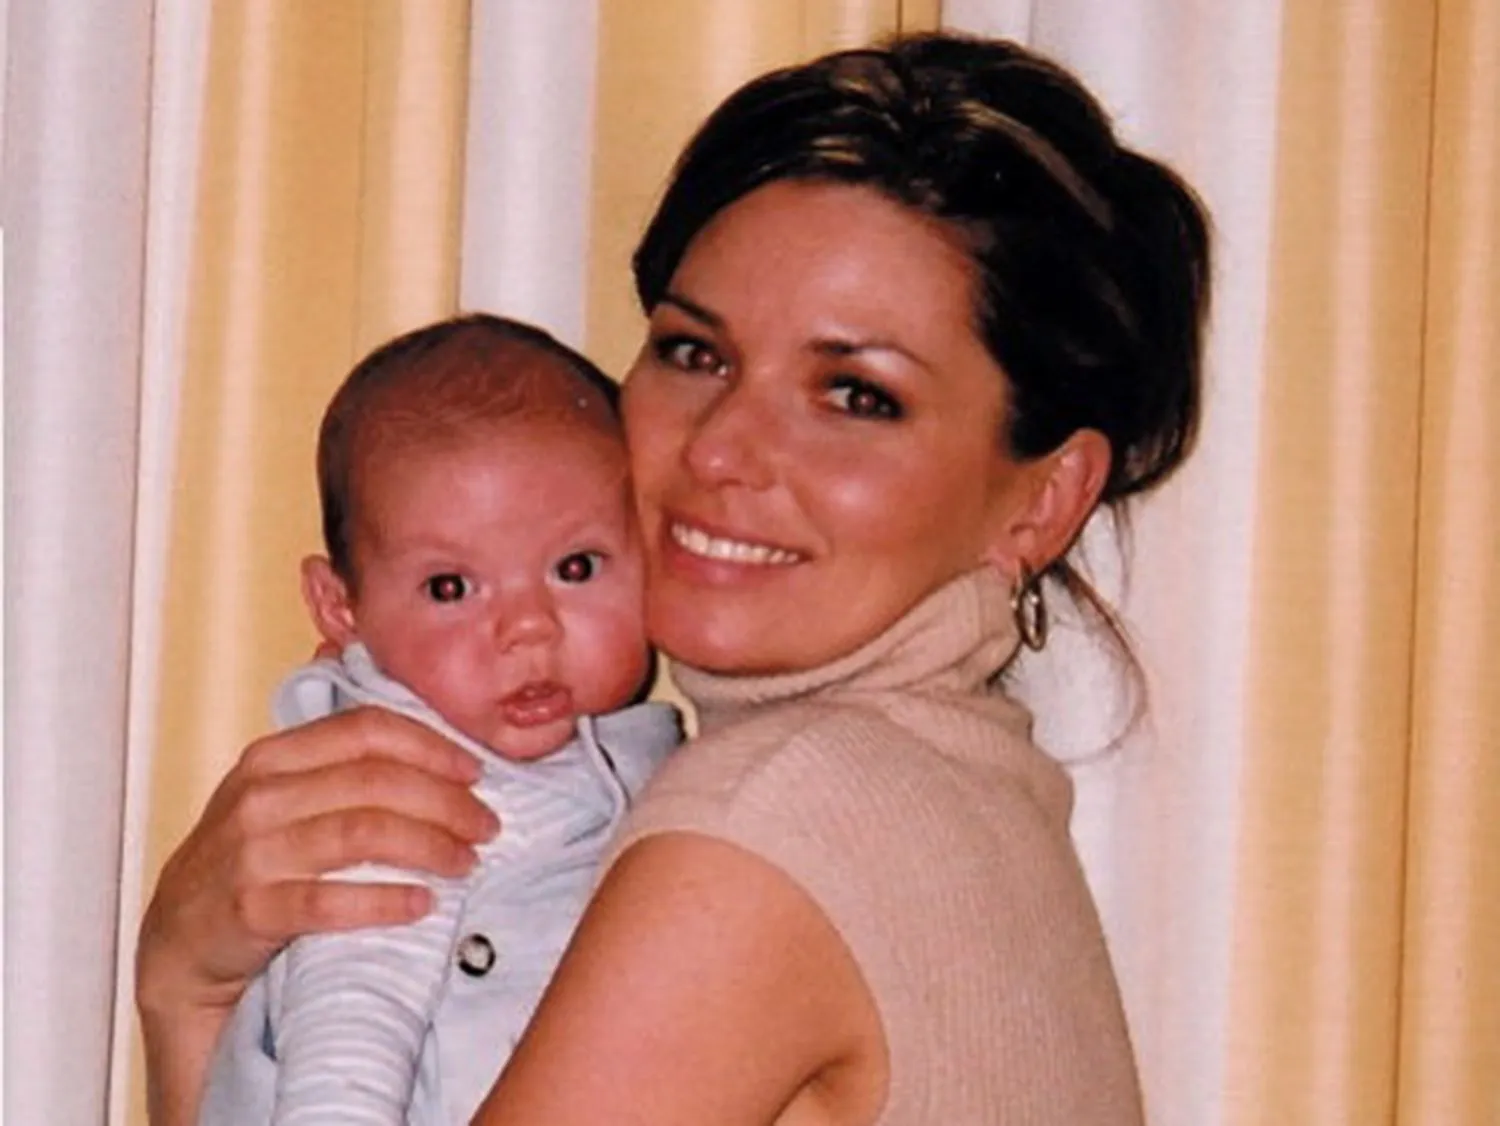 Who Is Eja Lange? Age, Bio, Career And More Of Shania Twain’s Son